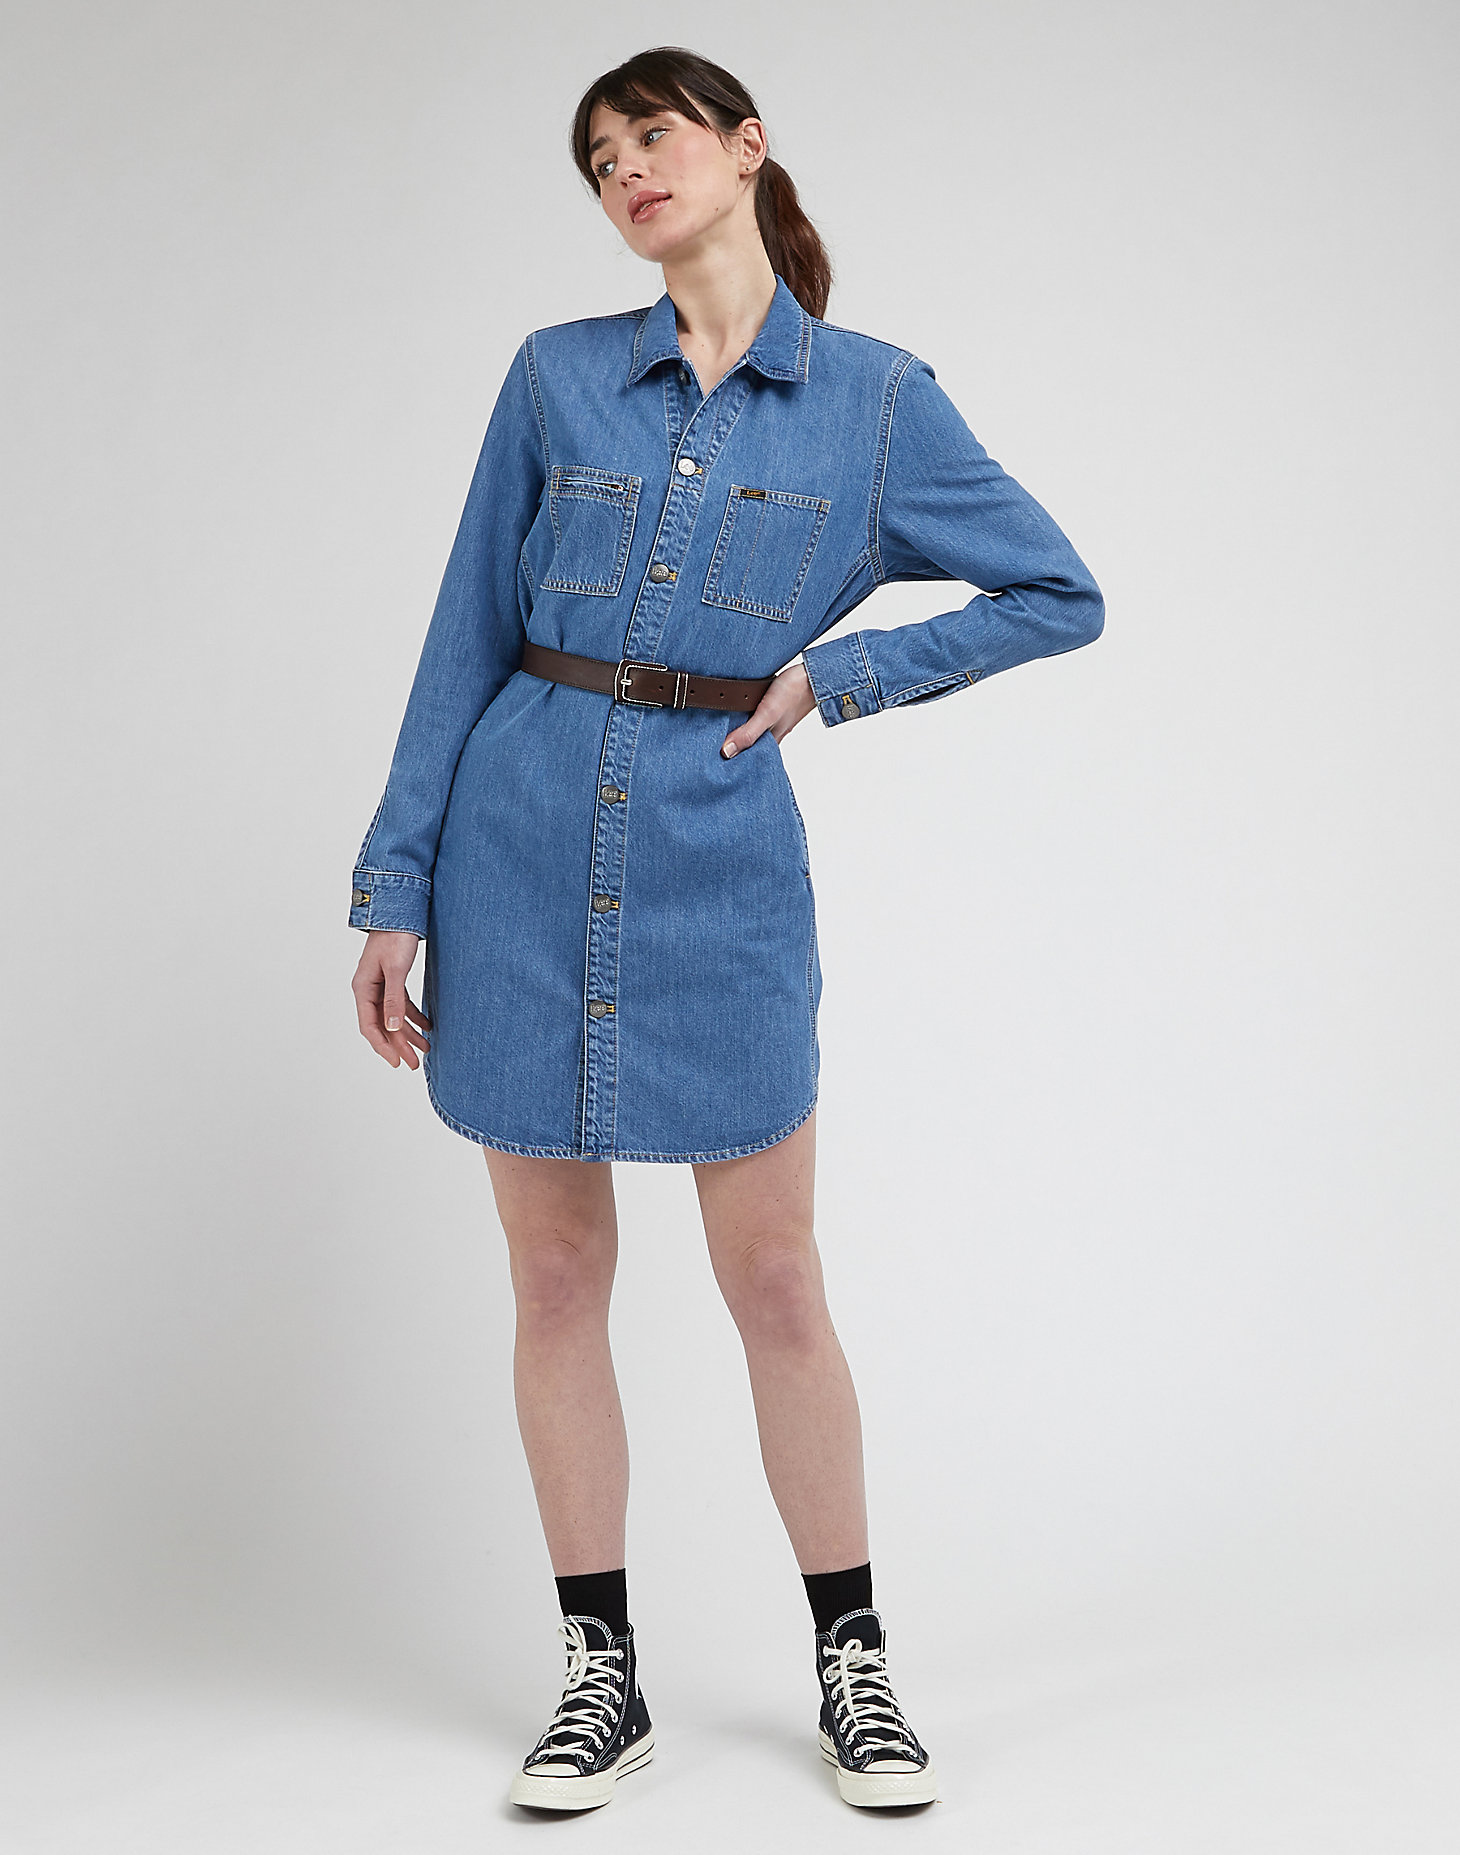 Unionall Shirt Dress in The Moment alternative view 2